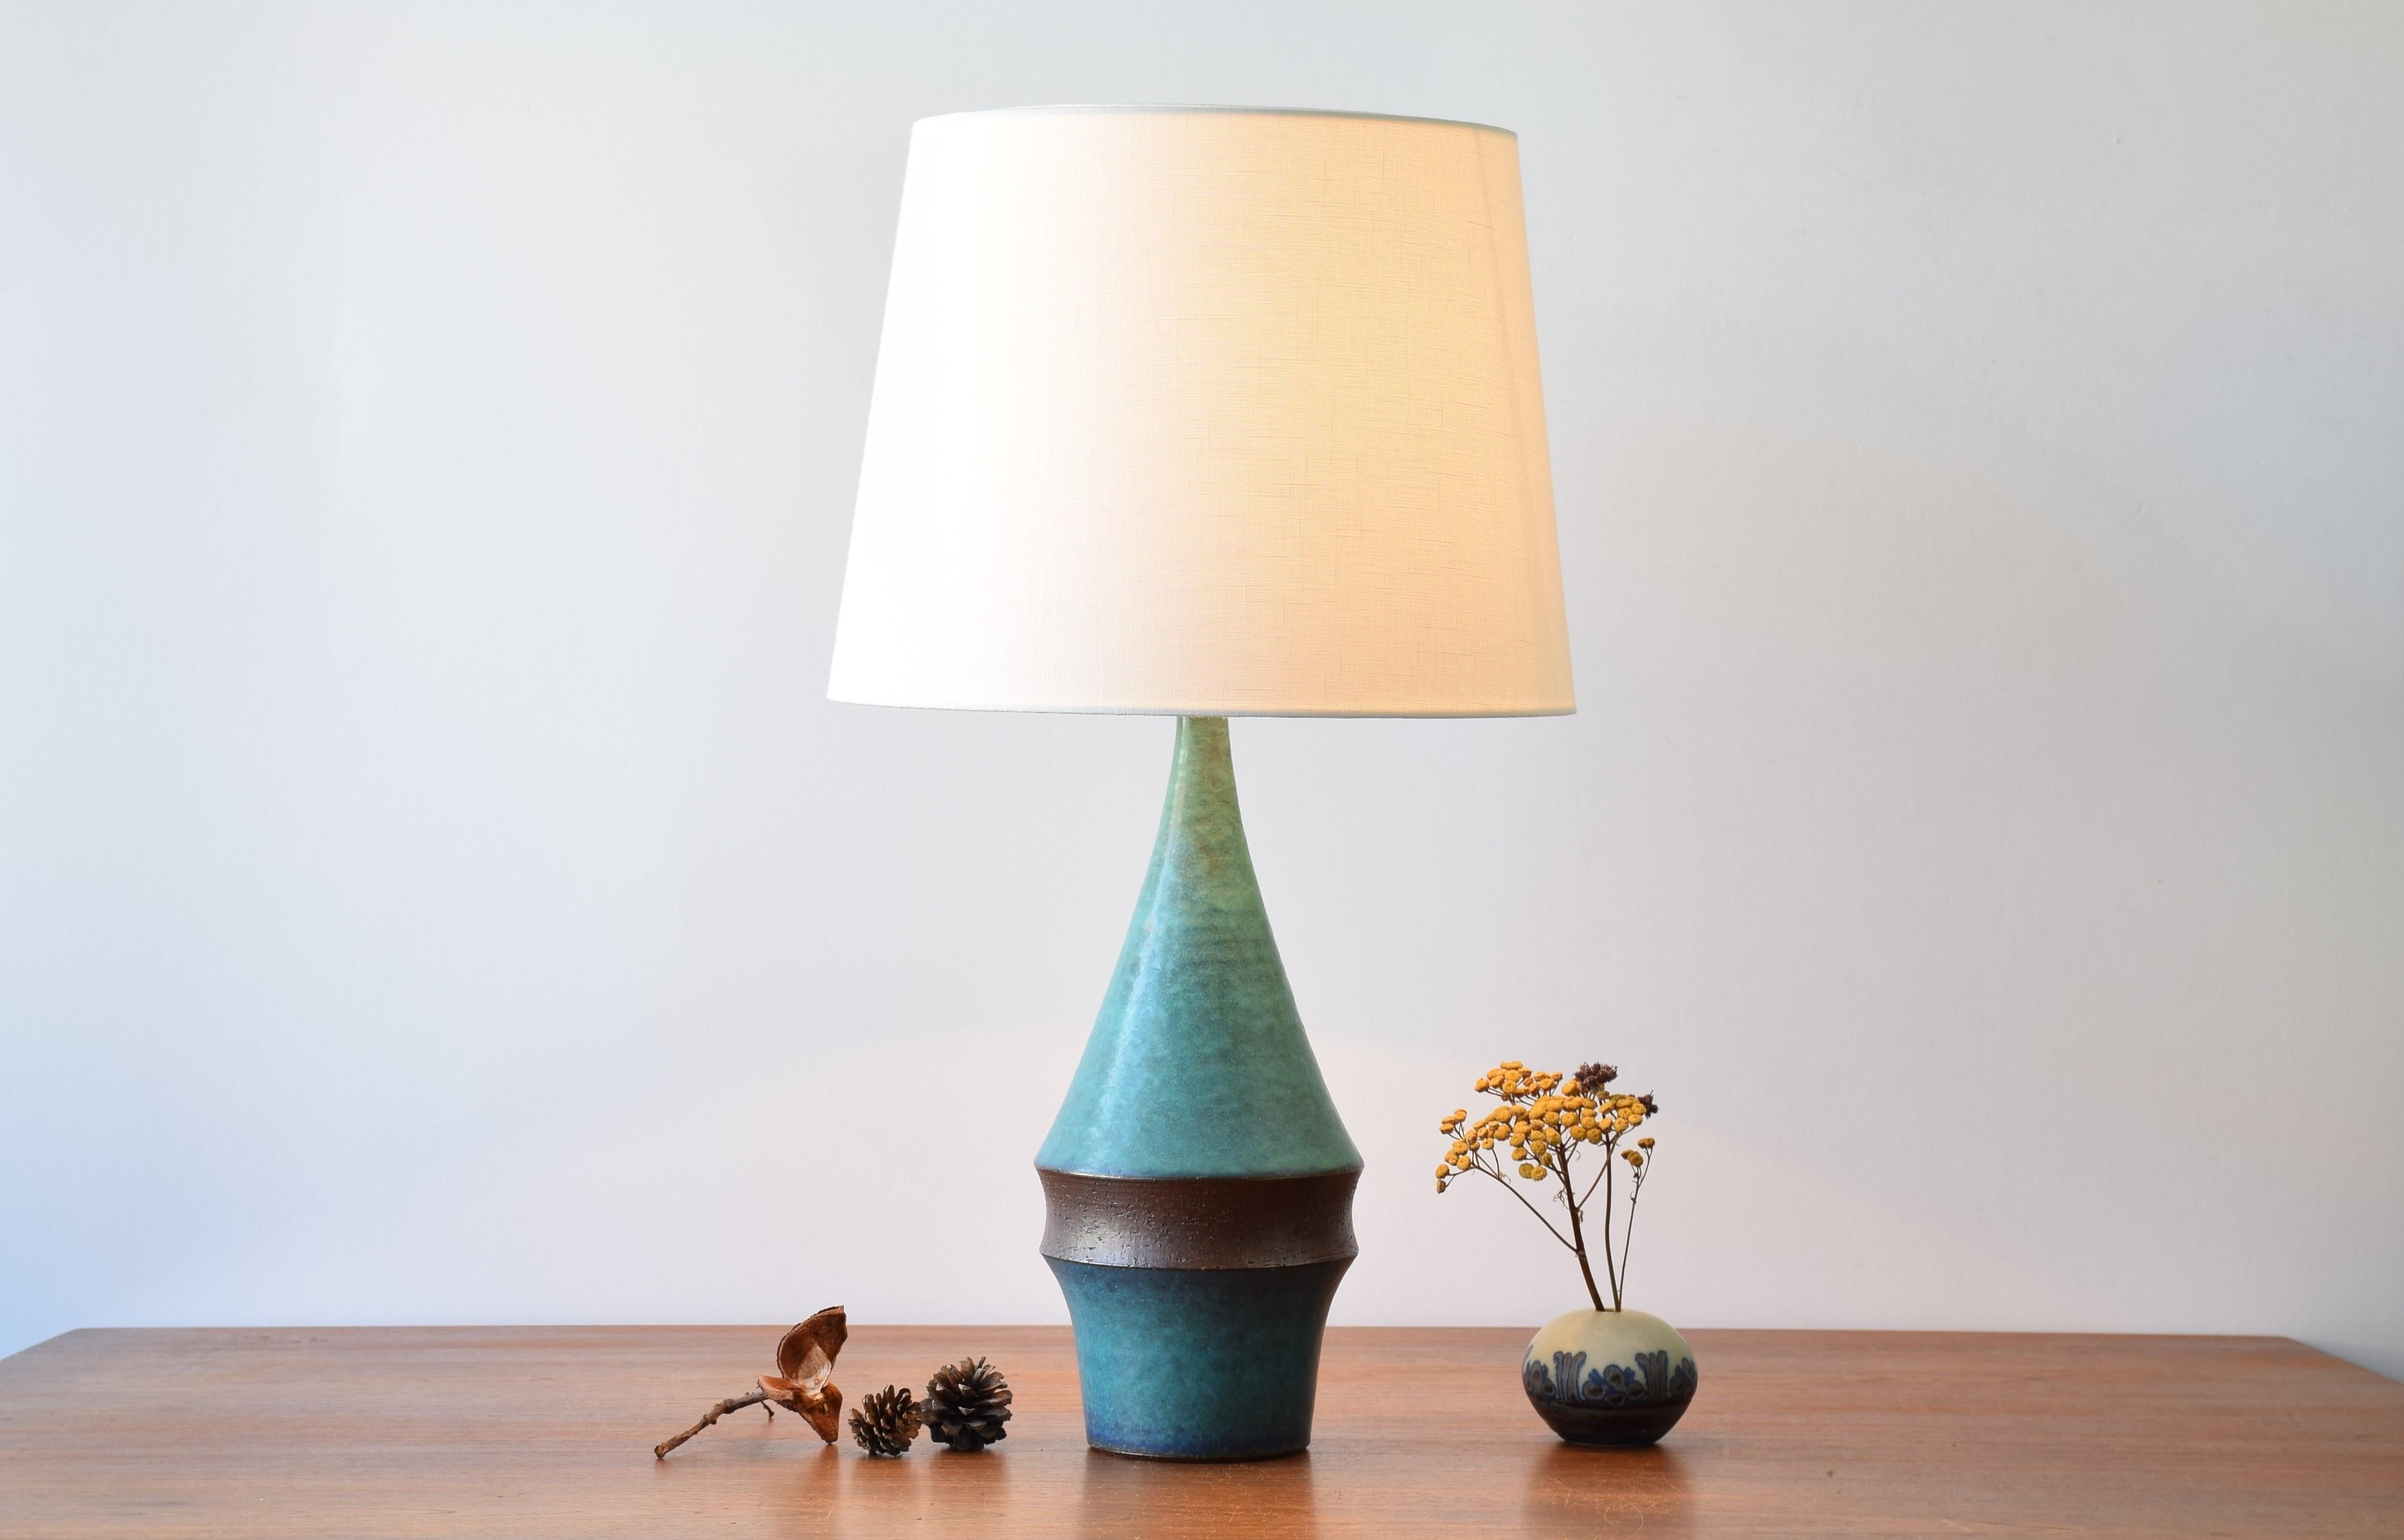 Danish Midcentury tall sculptural table lamp by Marianne Starck for Michael Andersen & Søn.
Turquoise blue glaze and dark brown clay.
Made circa 1960s. 

Included is a new lampshade designed in Denmark. It is made of woven fabric with some texture